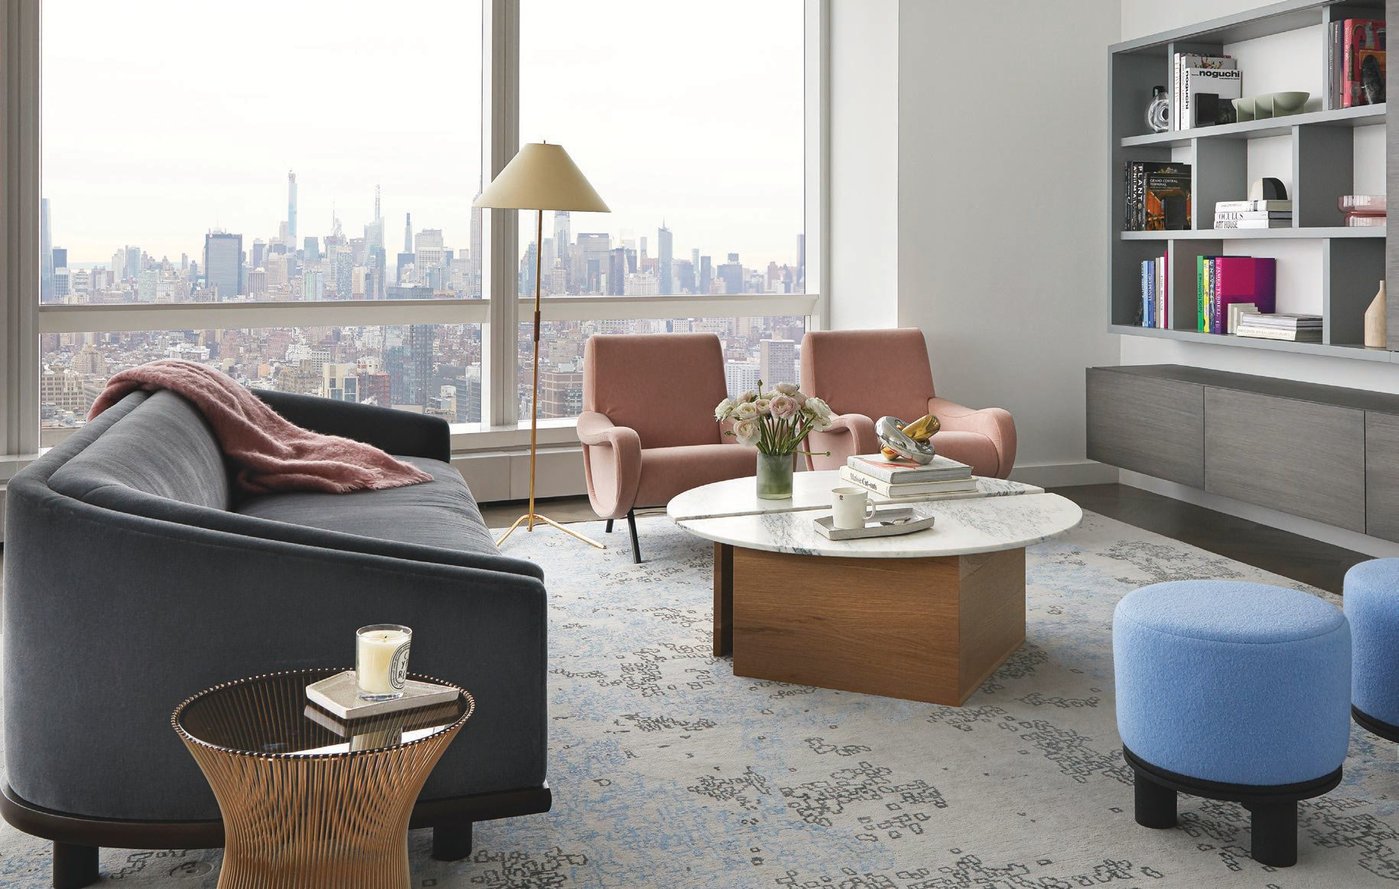 Half Moon coffee table by Ben & Aja Blanc and Lady chairs by Cassina in the living room. Photographed by Sharon Radisch